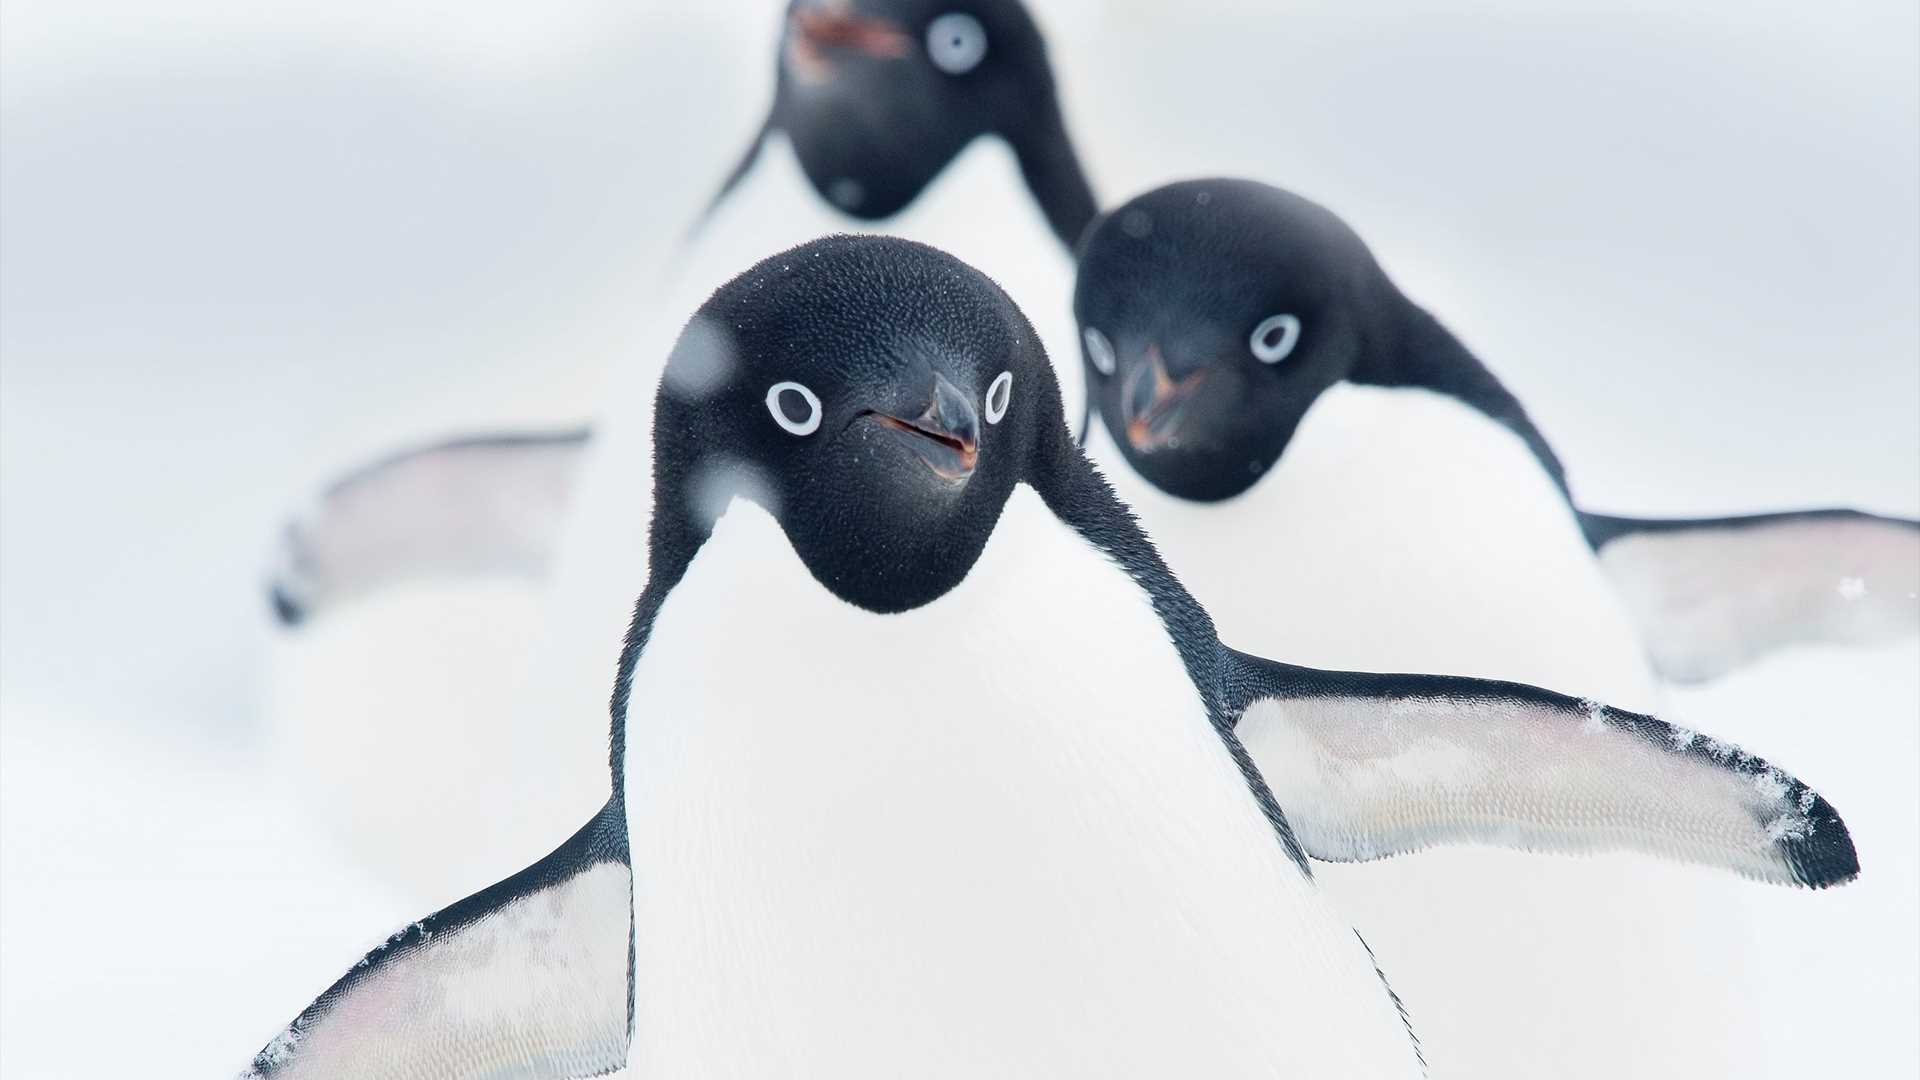 Meet the Elite 8: Penguins of the Southern Ocean